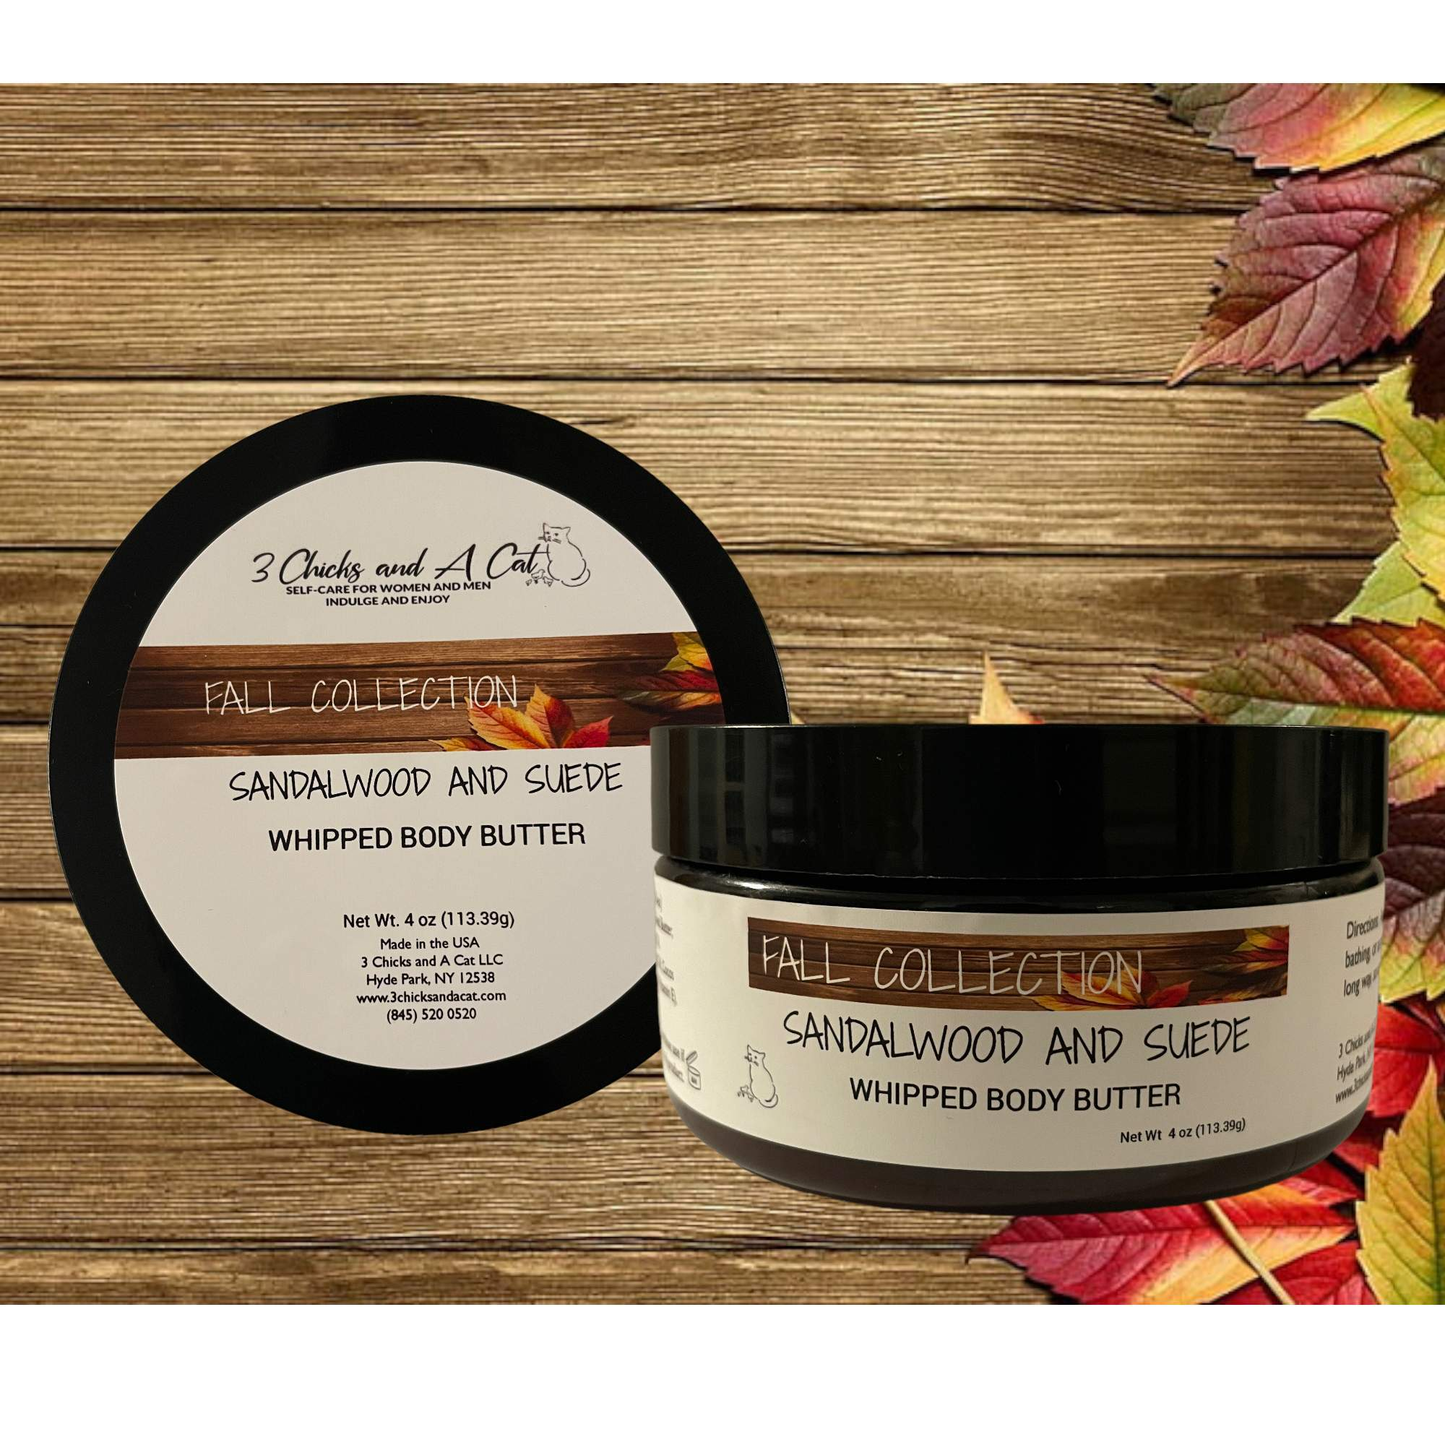 Sandalwood and Suede Body Butter 3 Chicks and A Cat